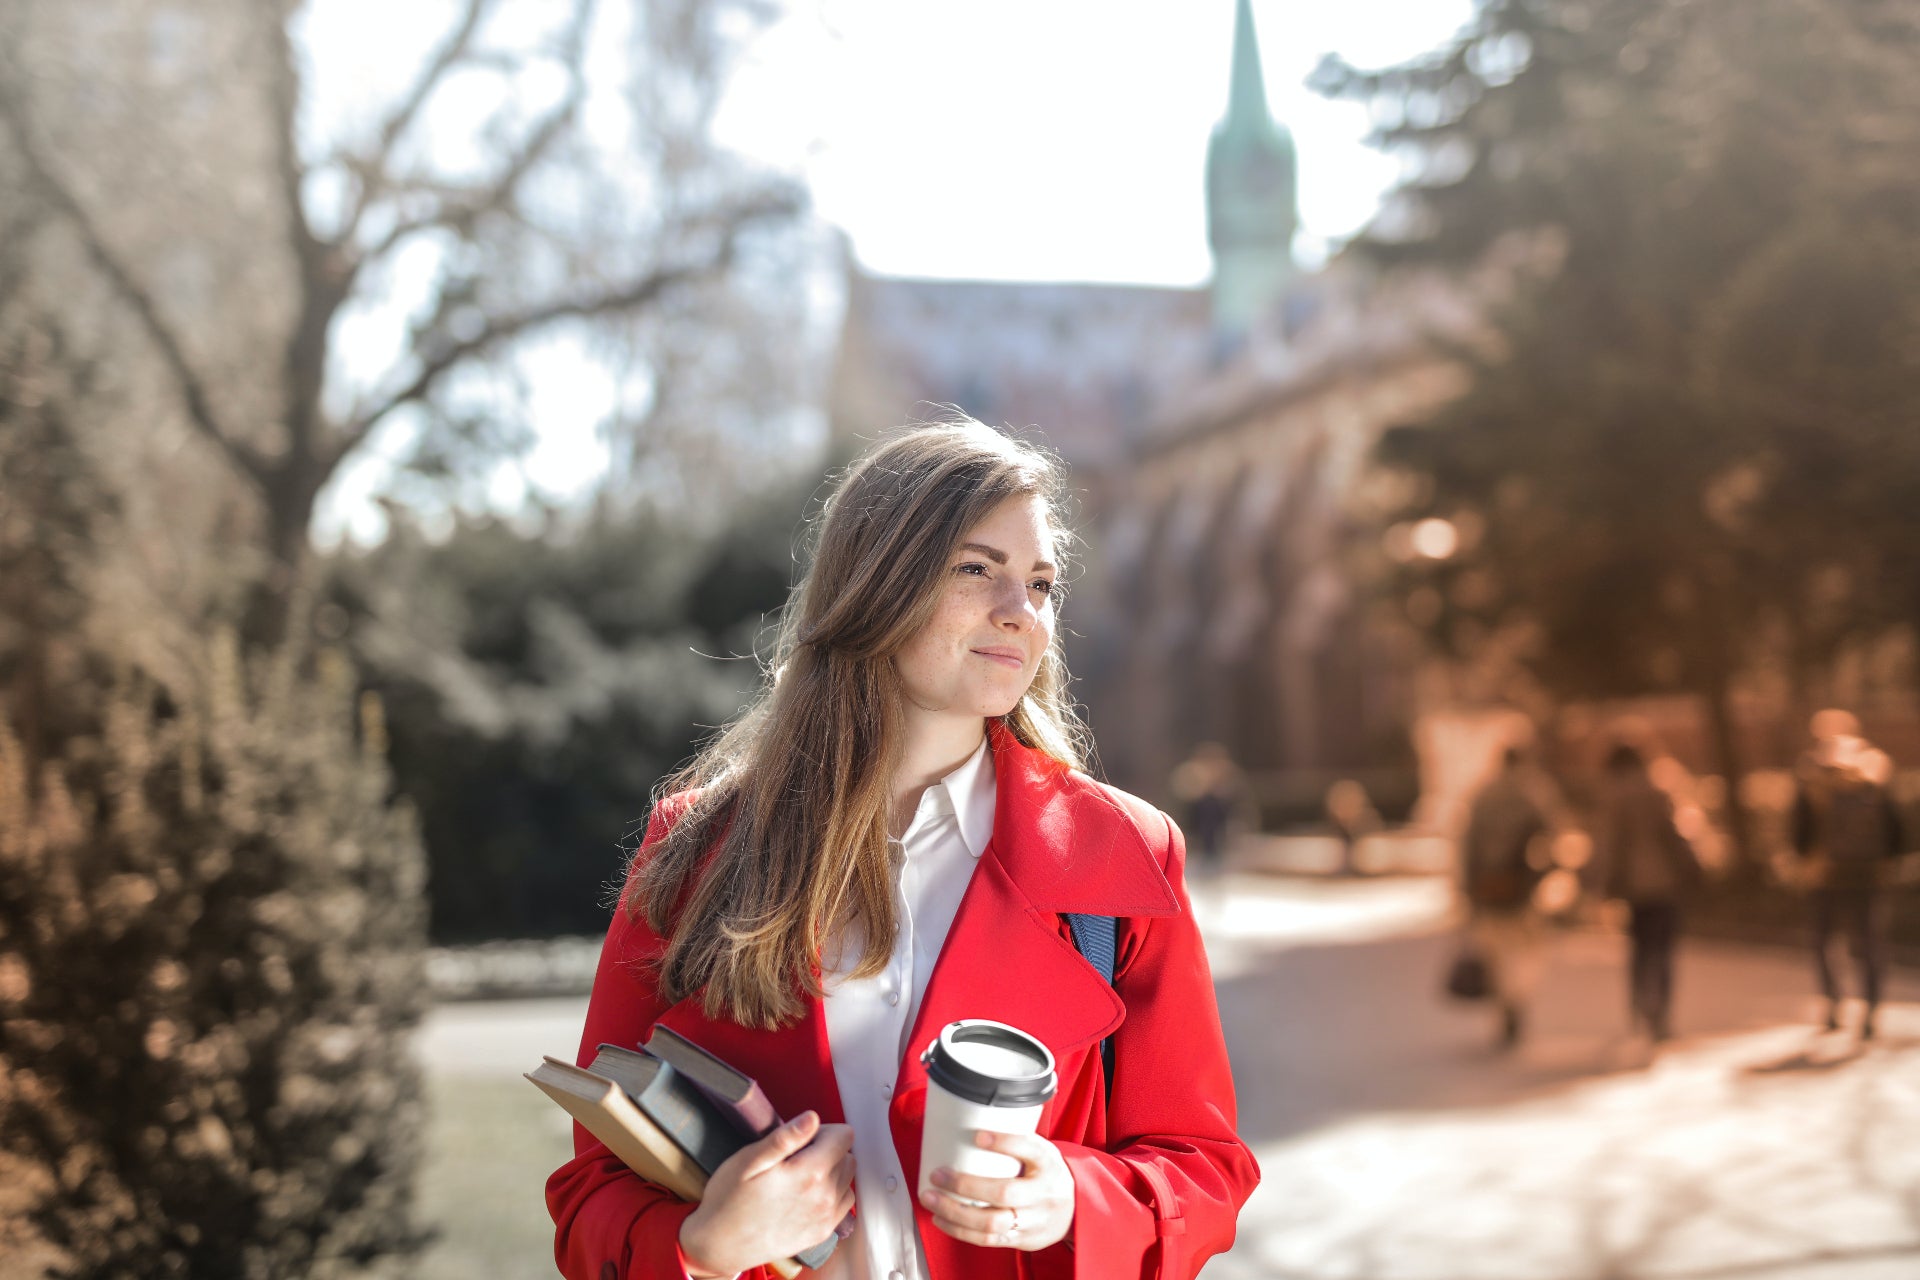 A young college girl wearing a red coat stands outside on campus, holding a stack of books and a coffee cup.